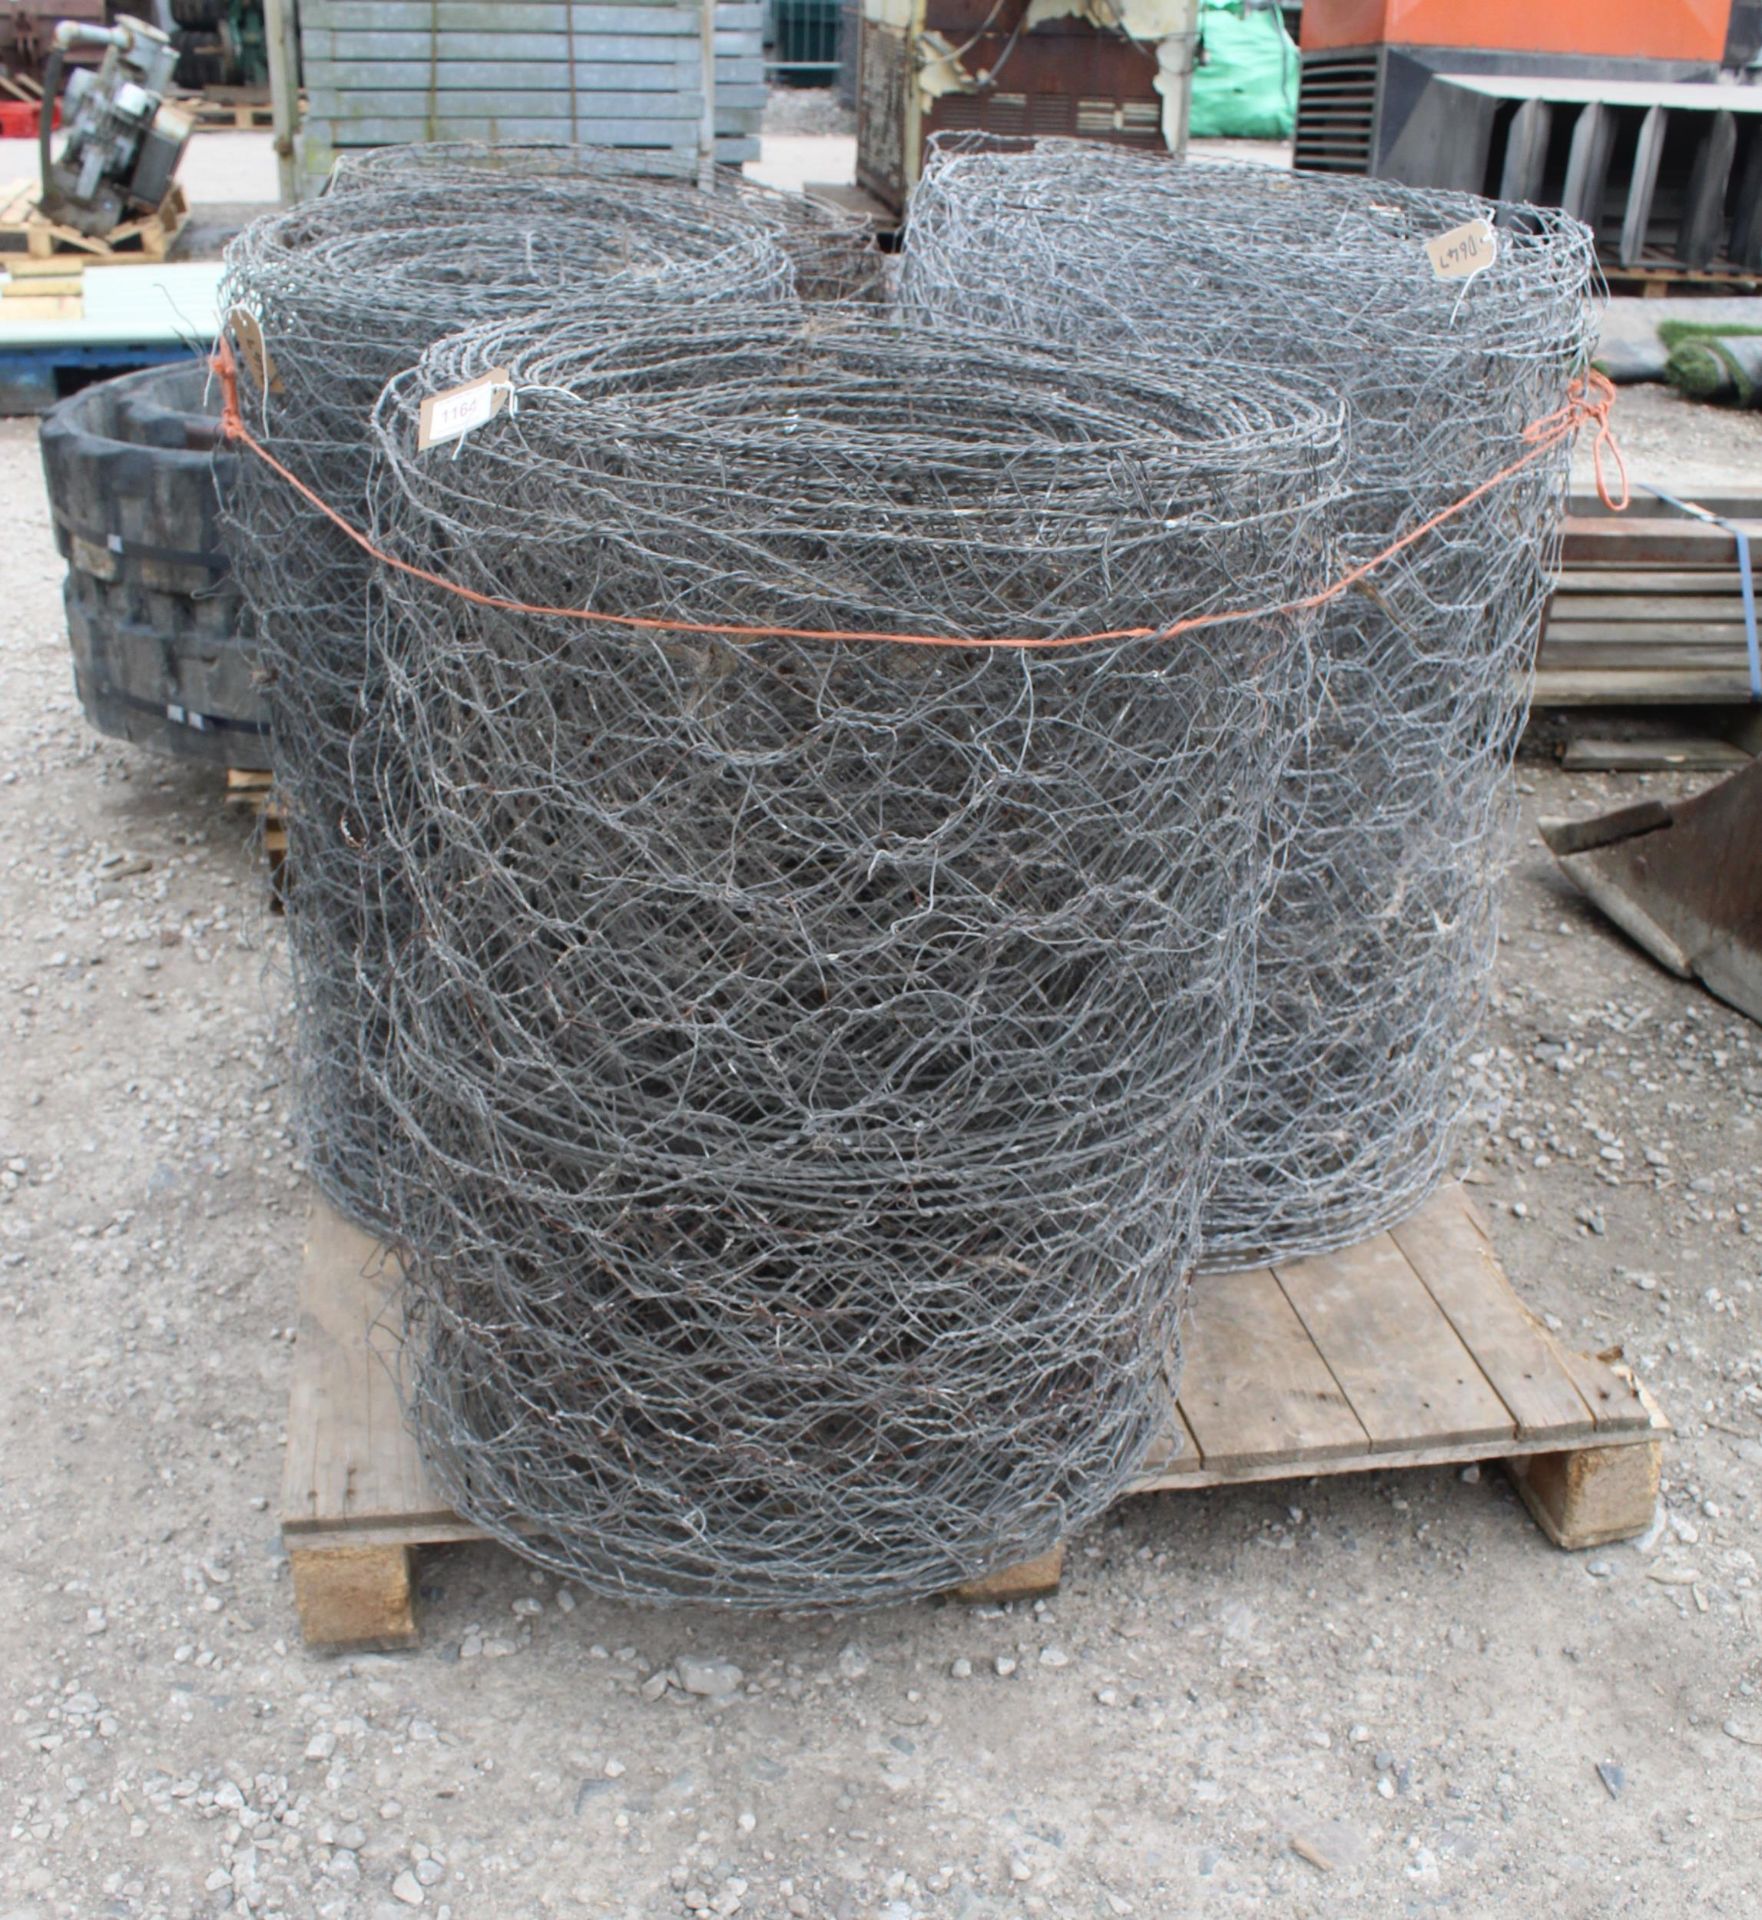 4 ROLLS OF WIRE NETTING 36" HIGH X 1 1/4" MESH AND 2 ROLLS 30" HIGH NO VAT - Image 2 of 2